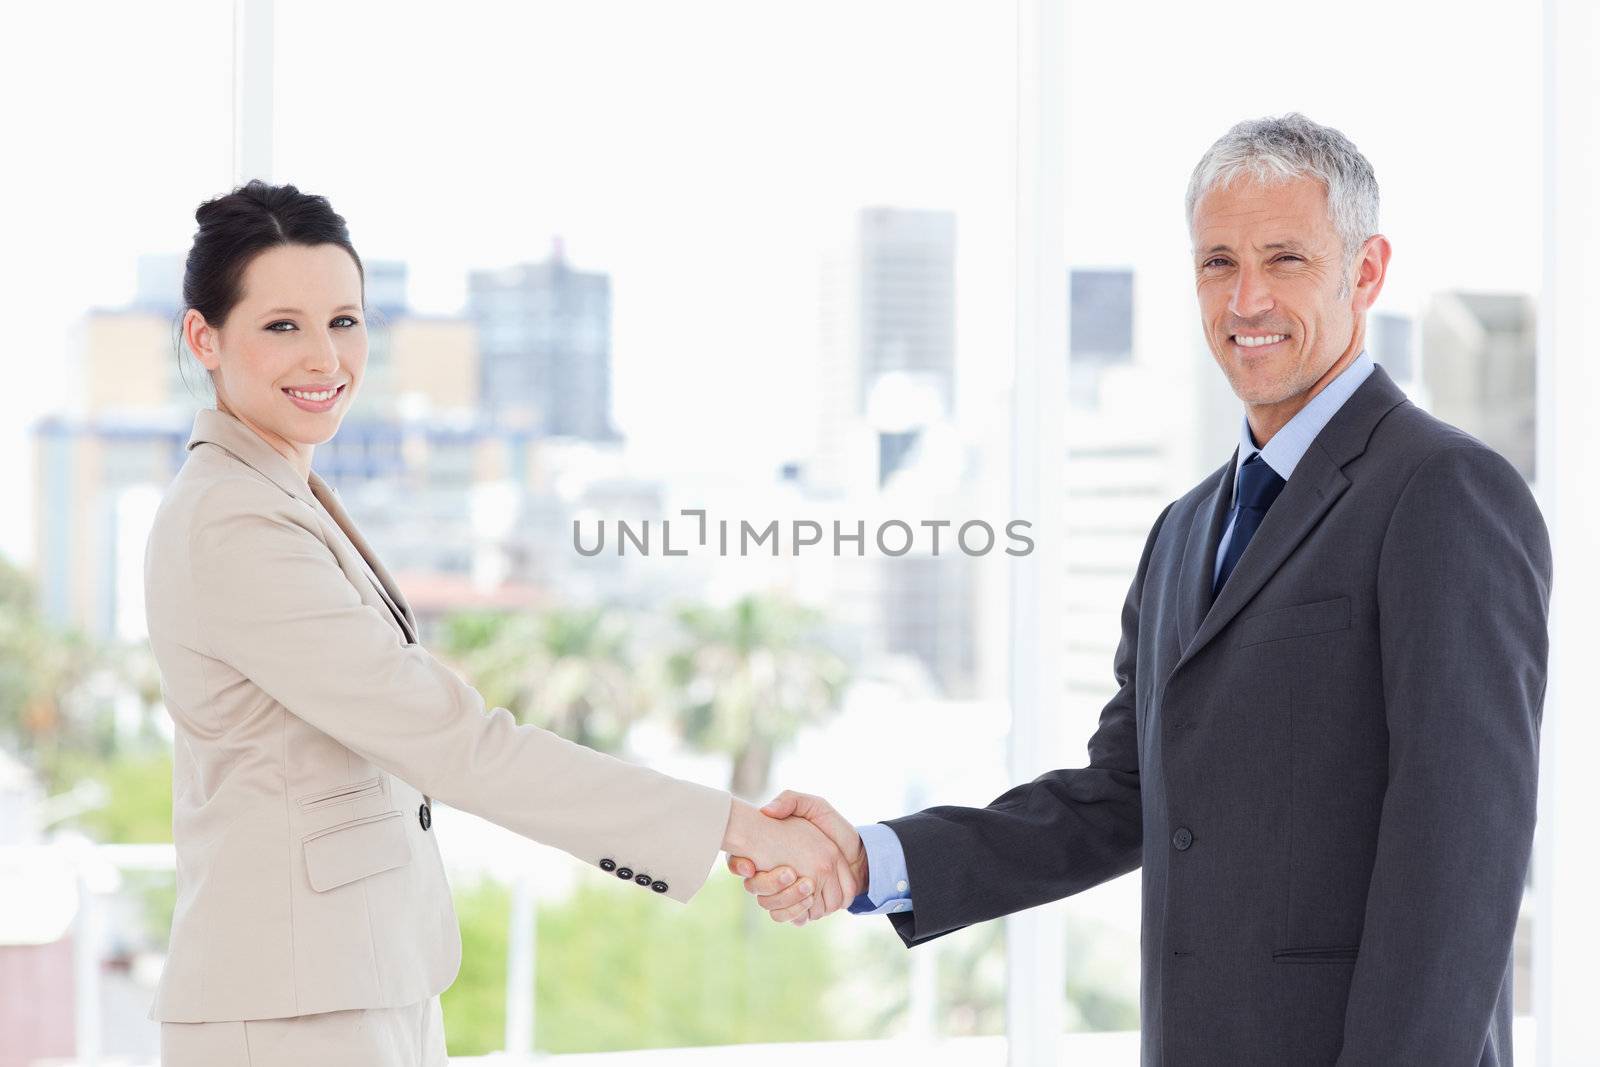 Two business people shaking hands while smiling and looking at the camera